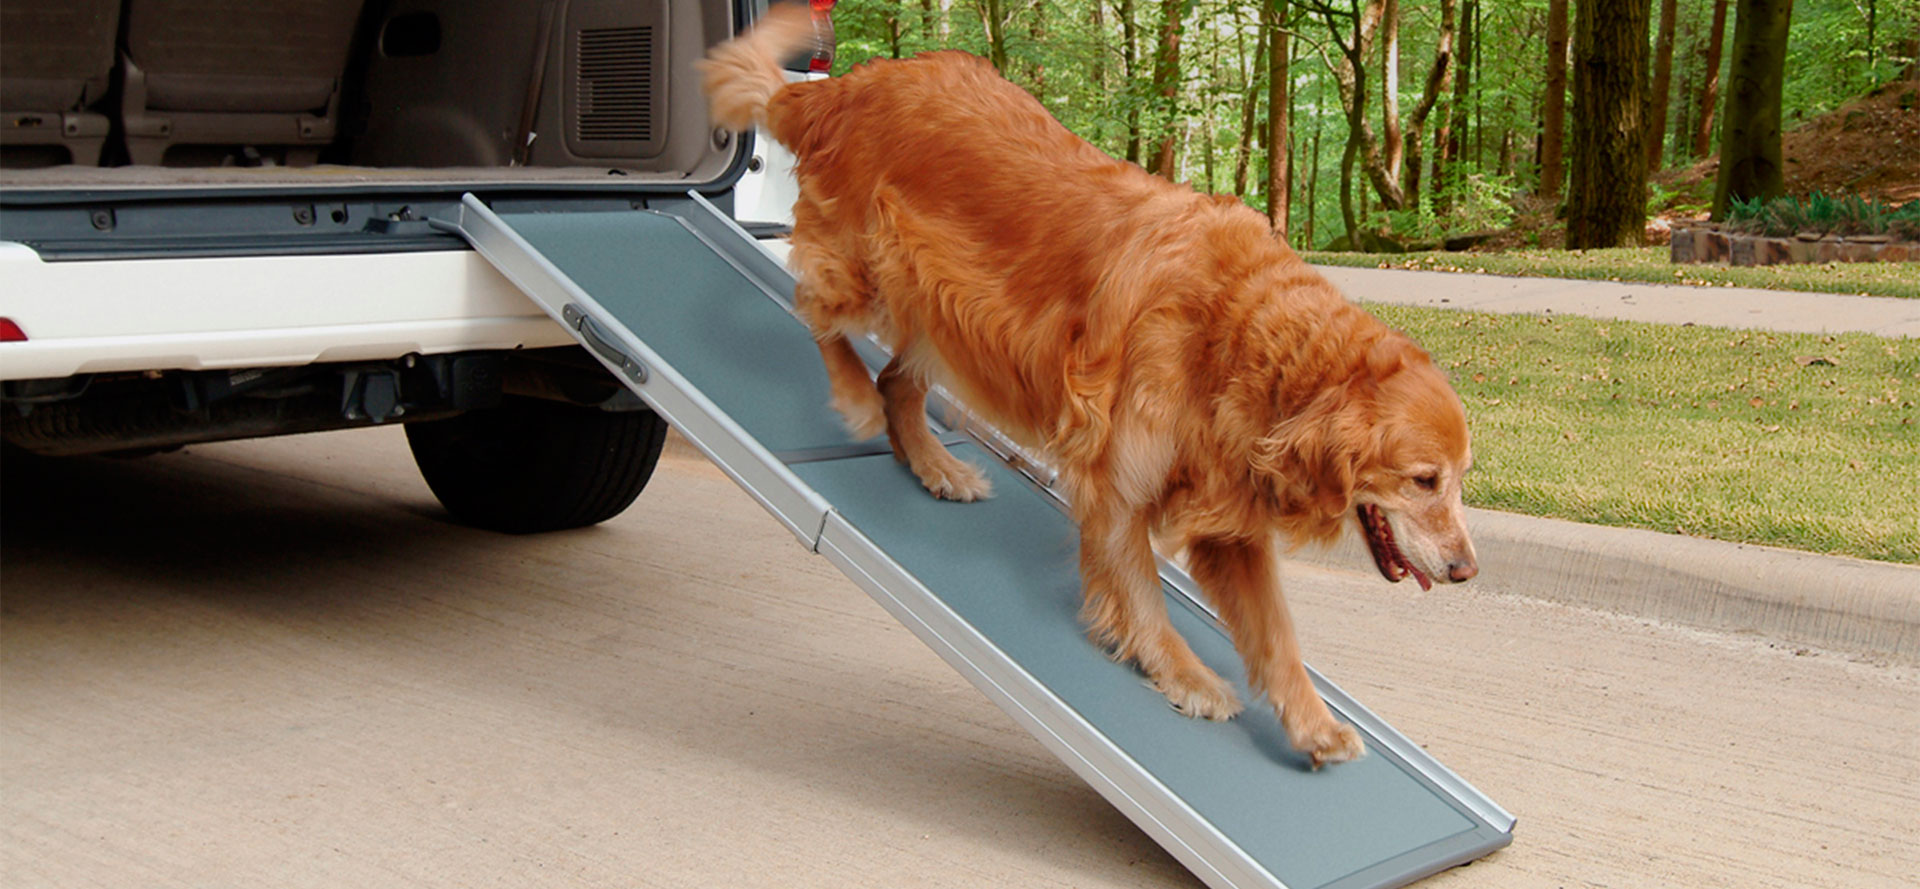 100 KG Capacity 98cm-166cm Non-slip Portable Wooden Pets Step Stairs Ladder COSTWAY Pet Ramp Perfect for Dogs In and Out of the Car Telescopic Dog Ramp 